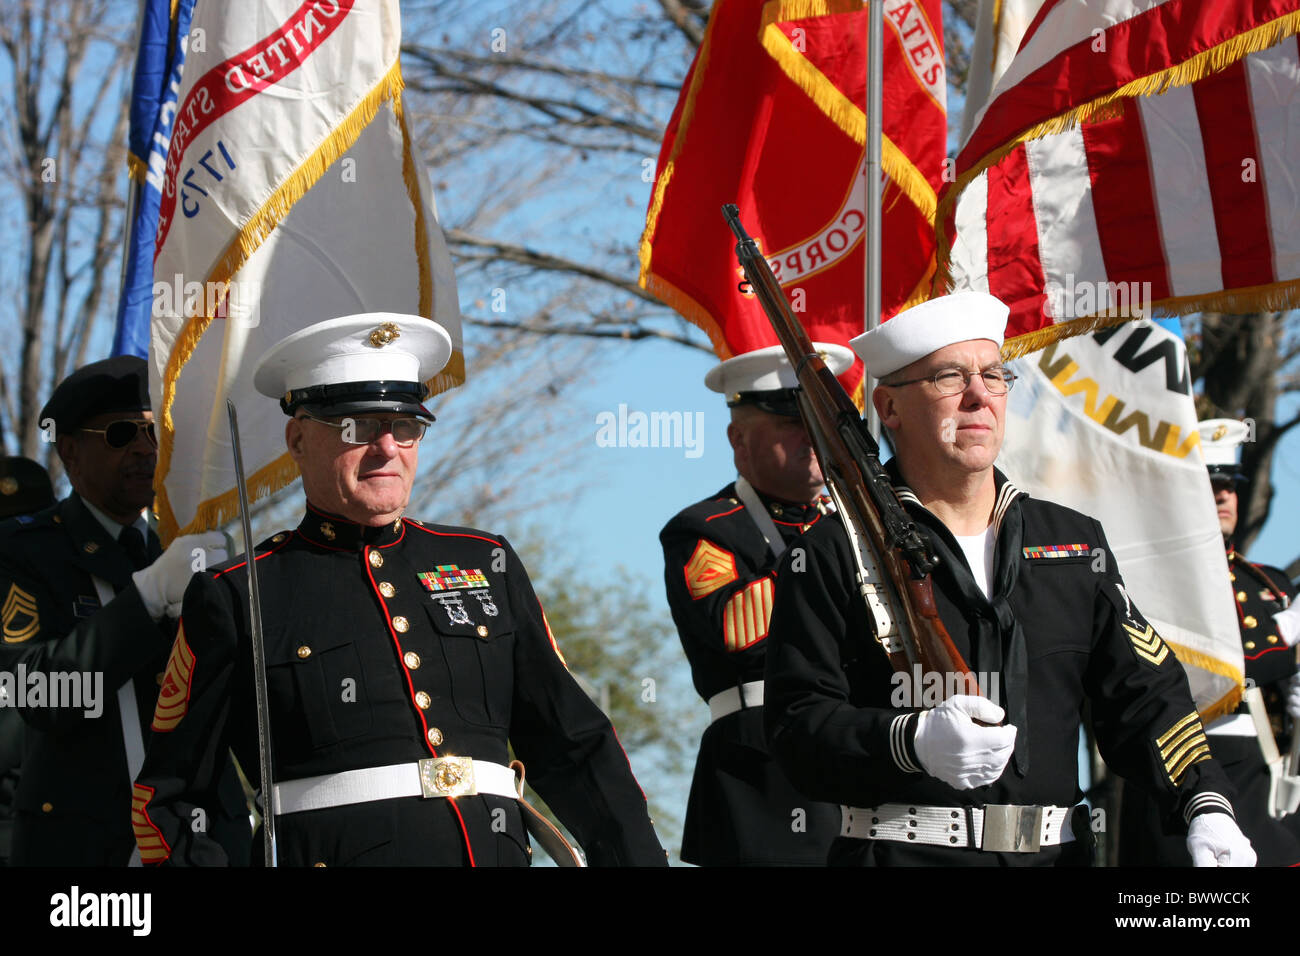 A military group walking in the Milwaukee Veterans Day Parade Stock Photo